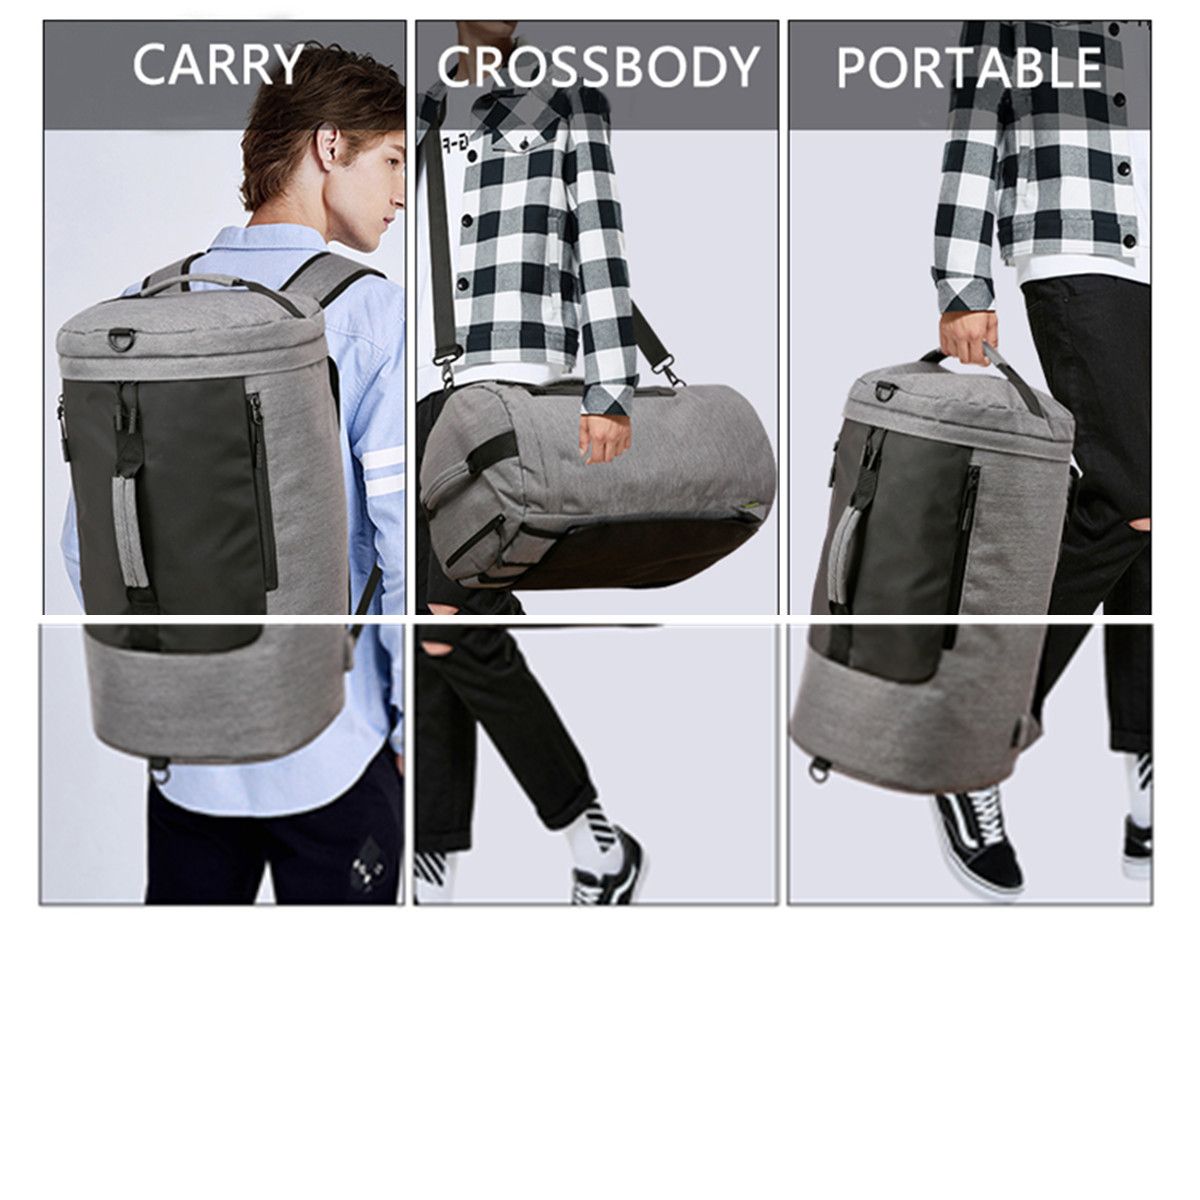 Mens-Travel-Bag-Duffle-Bag-Large-Capacity-Gym-With-Separate-Shoes-Compartment-Luggage-Storage-Contai-1425130